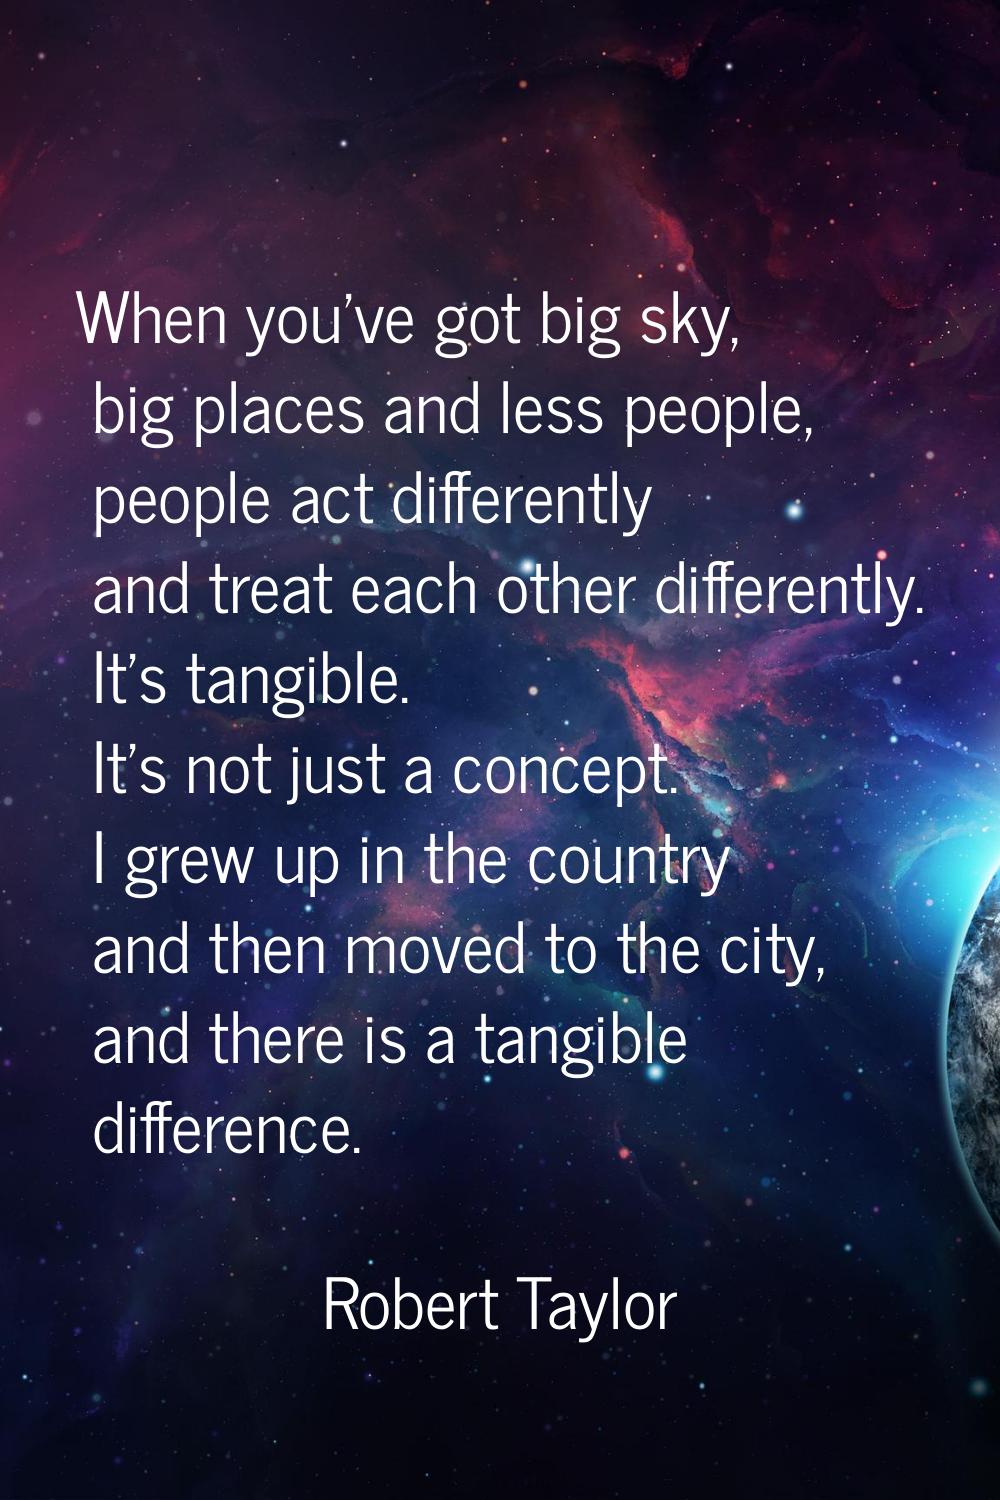 When you've got big sky, big places and less people, people act differently and treat each other di